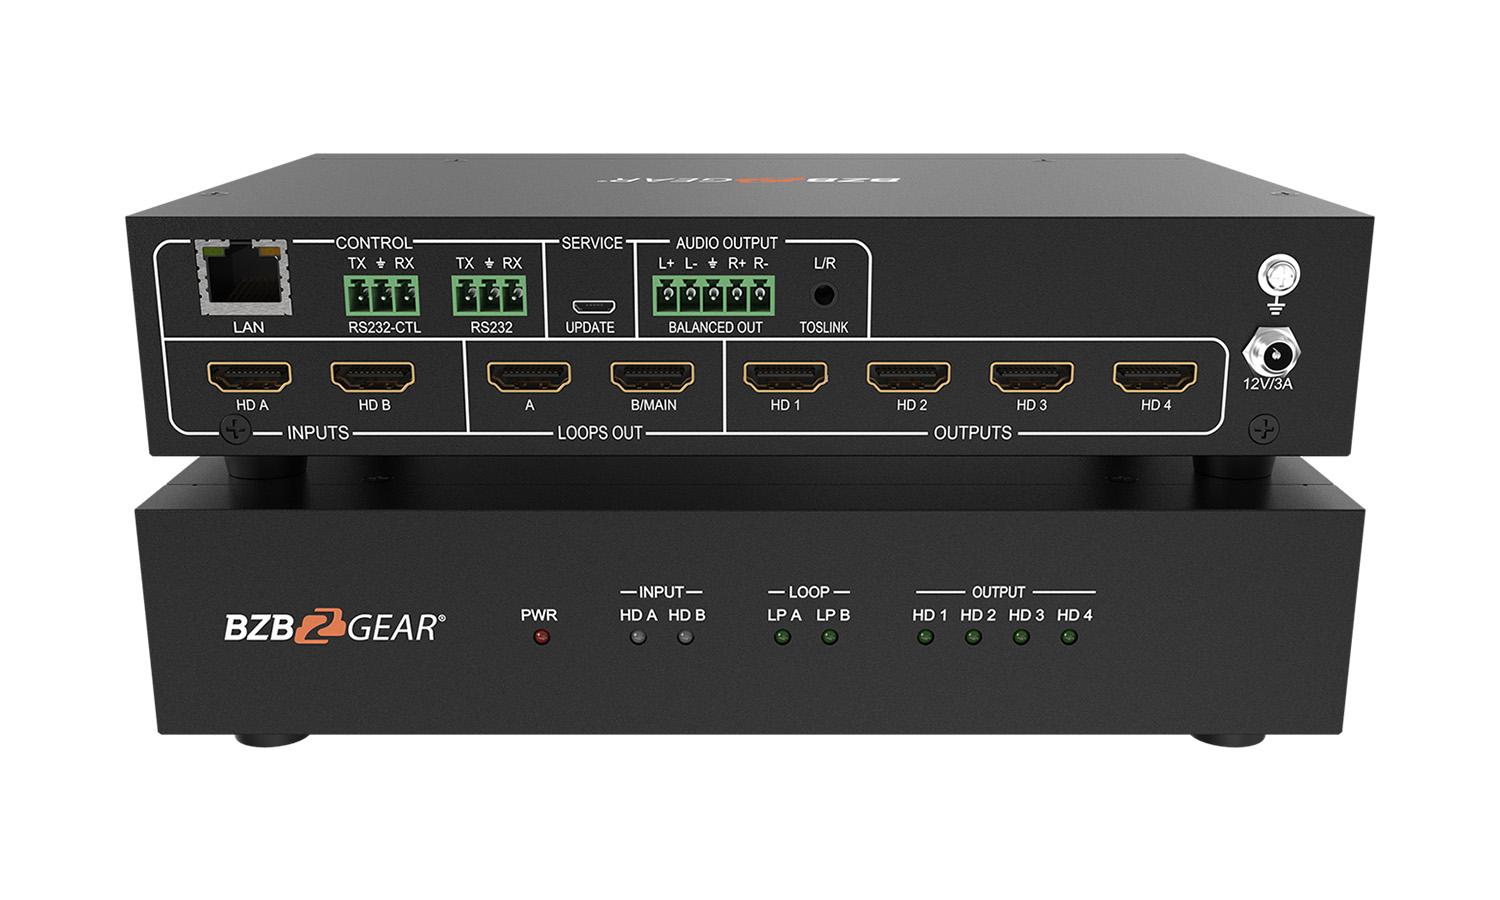 BG-UHD-VW24 4K UHD HDMI 2.0 2X2 Video Wall Processor with HDCP 2.2 and IP/RS232 Control by BZBGEAR